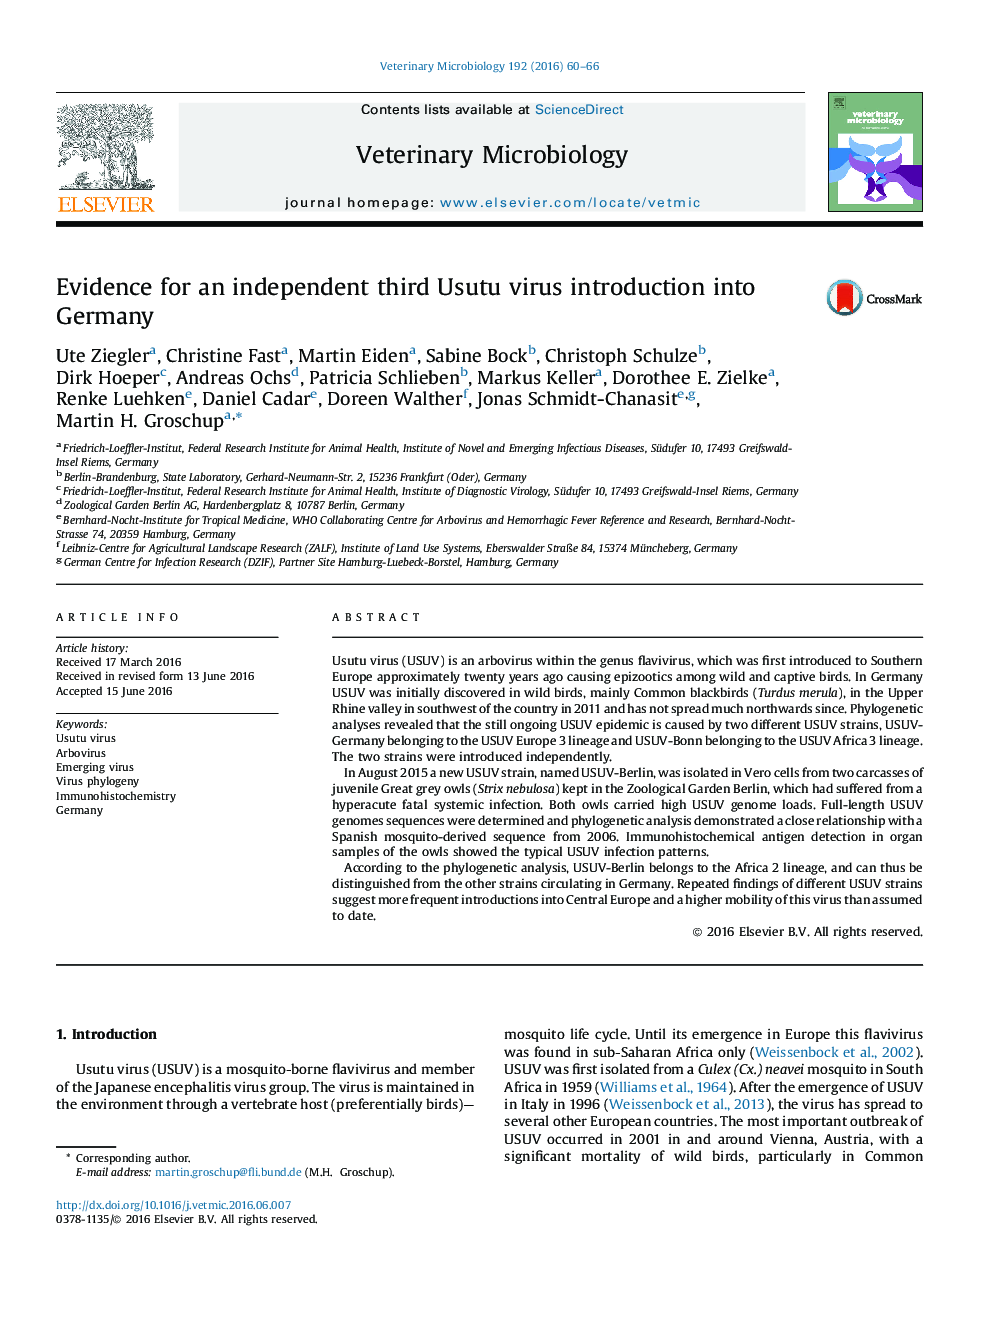 Evidence for an independent third Usutu virus introduction into Germany